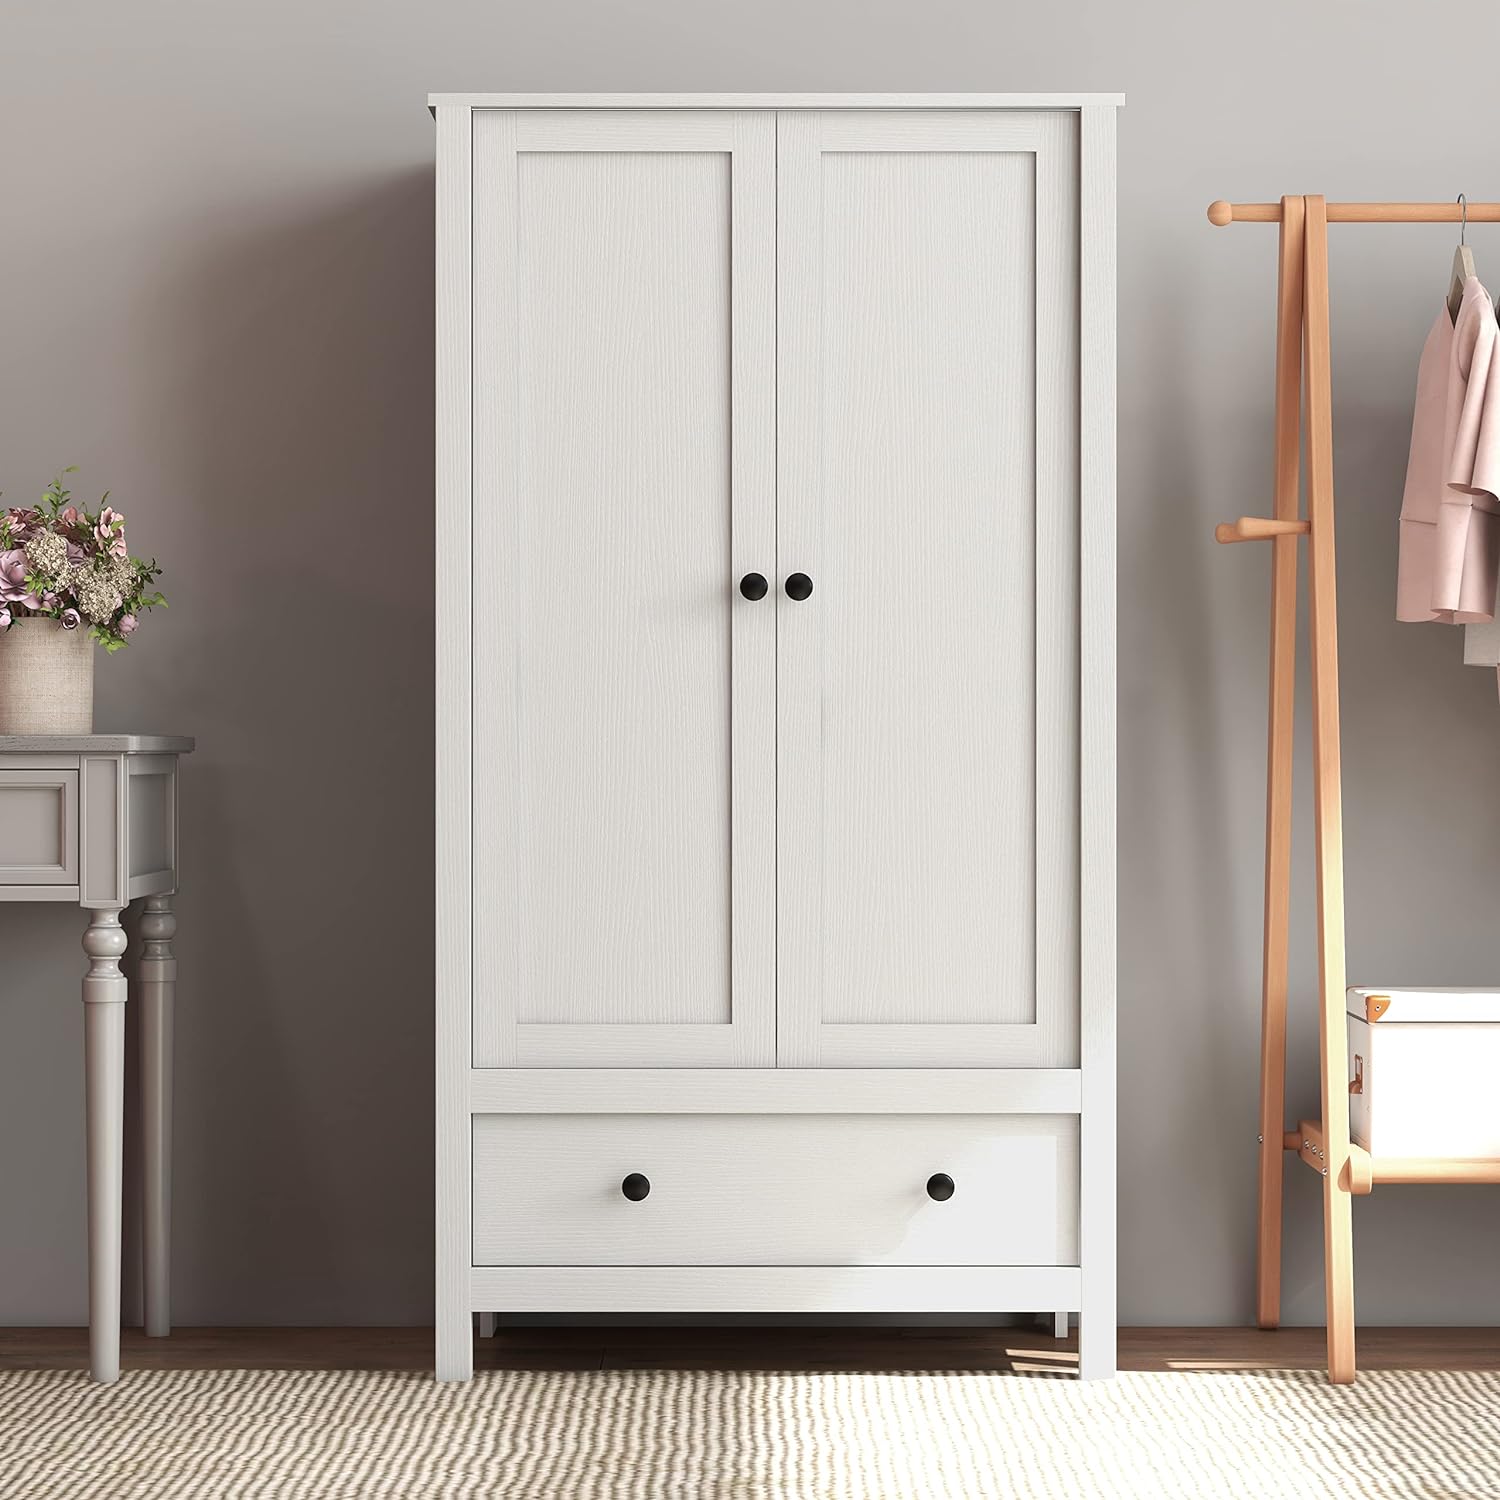 I ordered the Wardrobe for our guest room. It is just the right size - it fits into the corner of the room. It was easy to assemble. It is not heavy in weight, but it is sturdy and the quality is better than expected! A great buy for us.